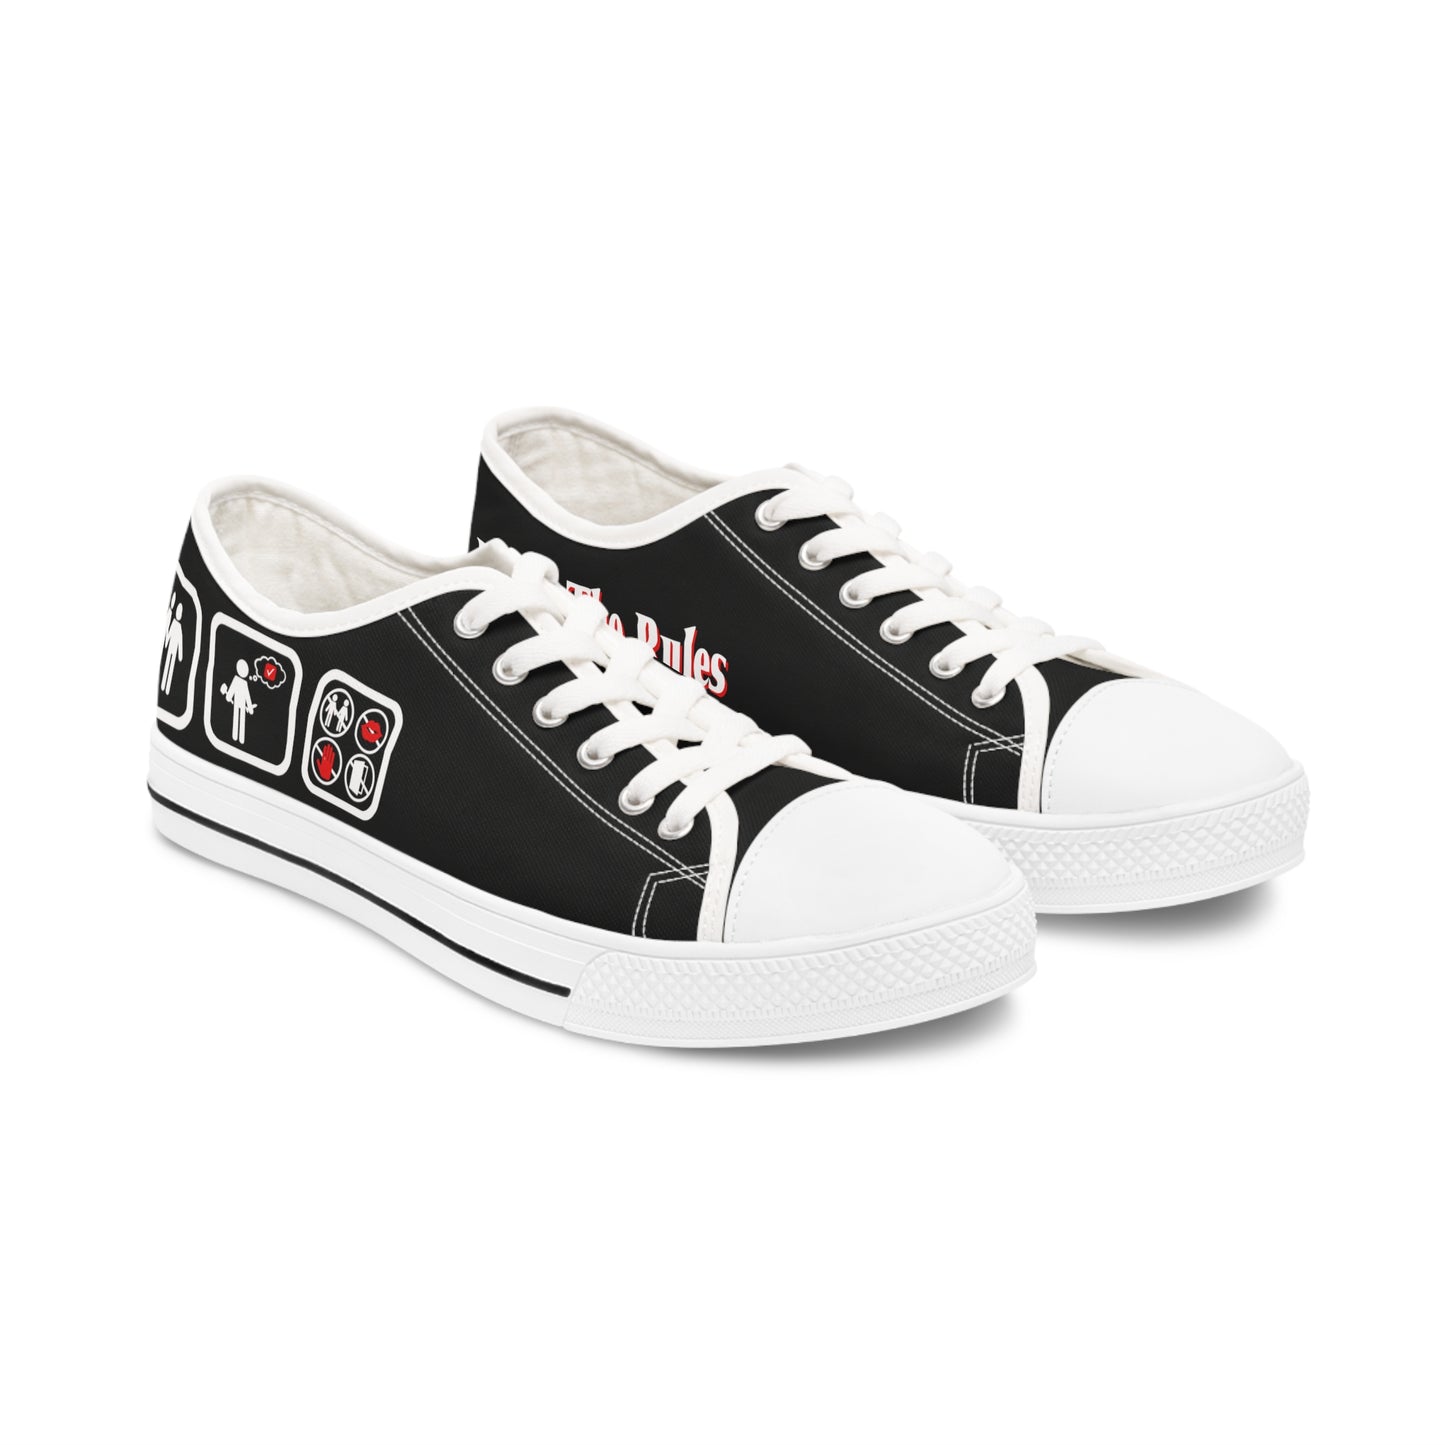 The Rules Women's Low Top Sneakers